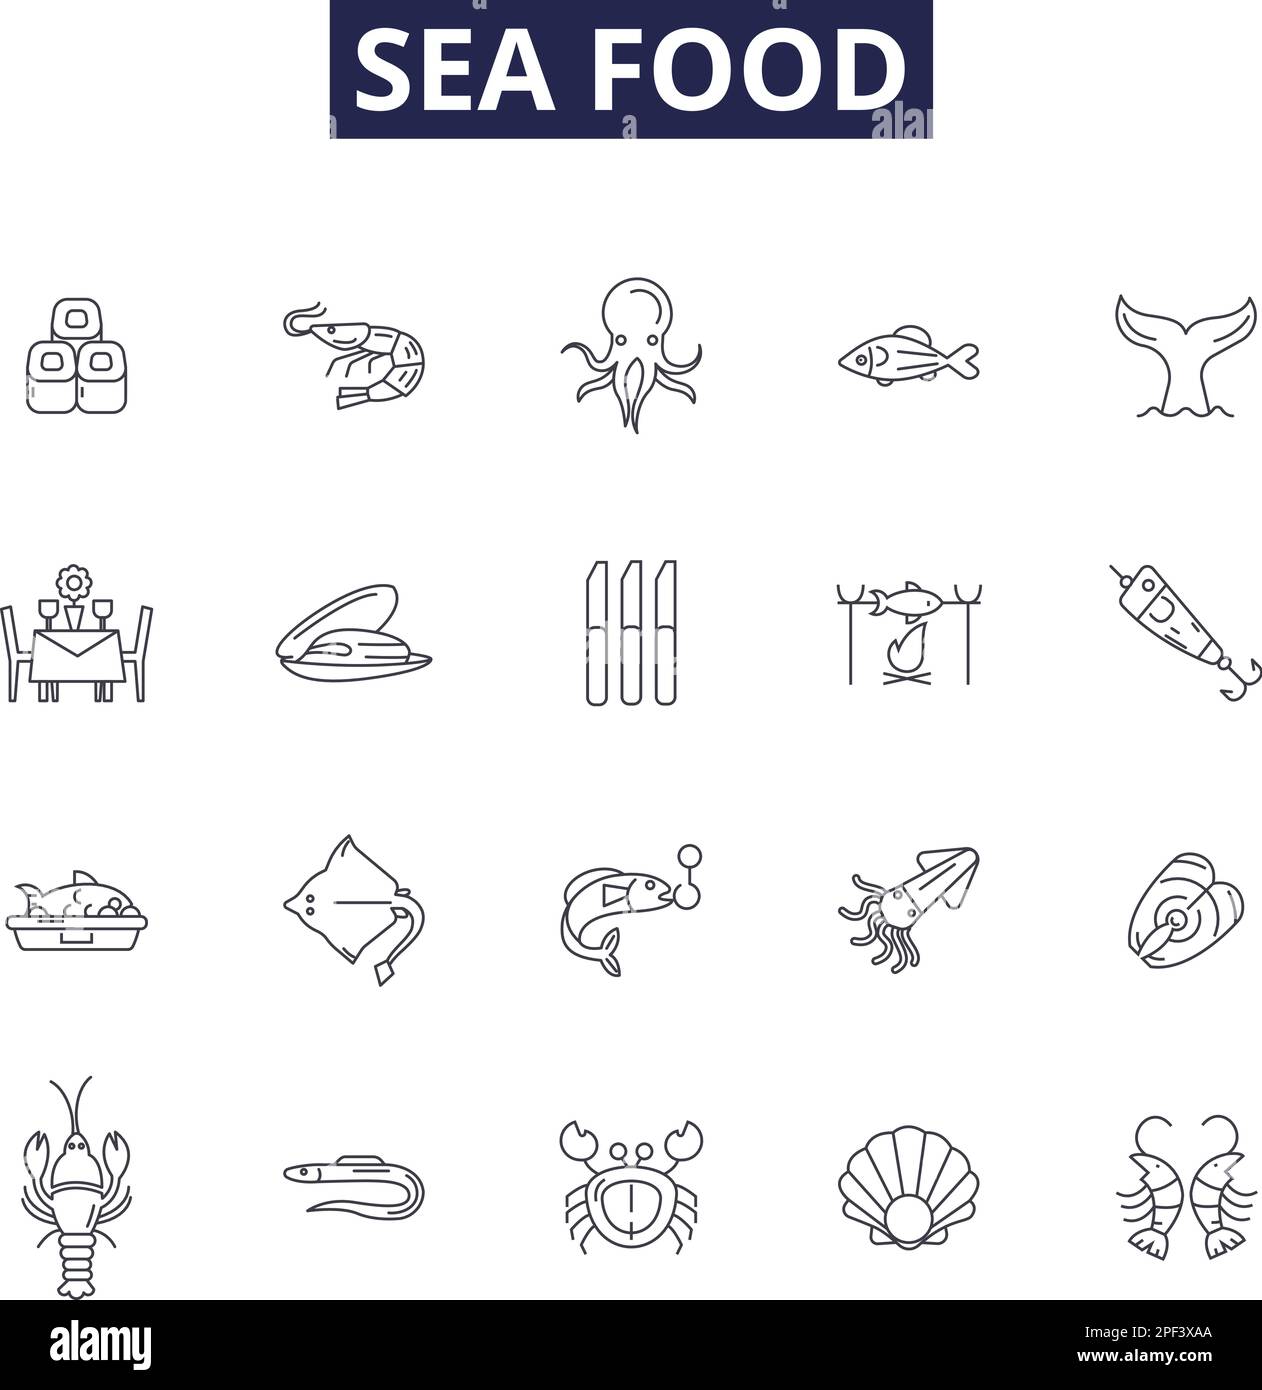 Sea food line vector icons and signs. Fish, Shrimp, Clams, Oysters, Crab, Salmon, Halibut, Lobster outline vector illustration set Stock Vector